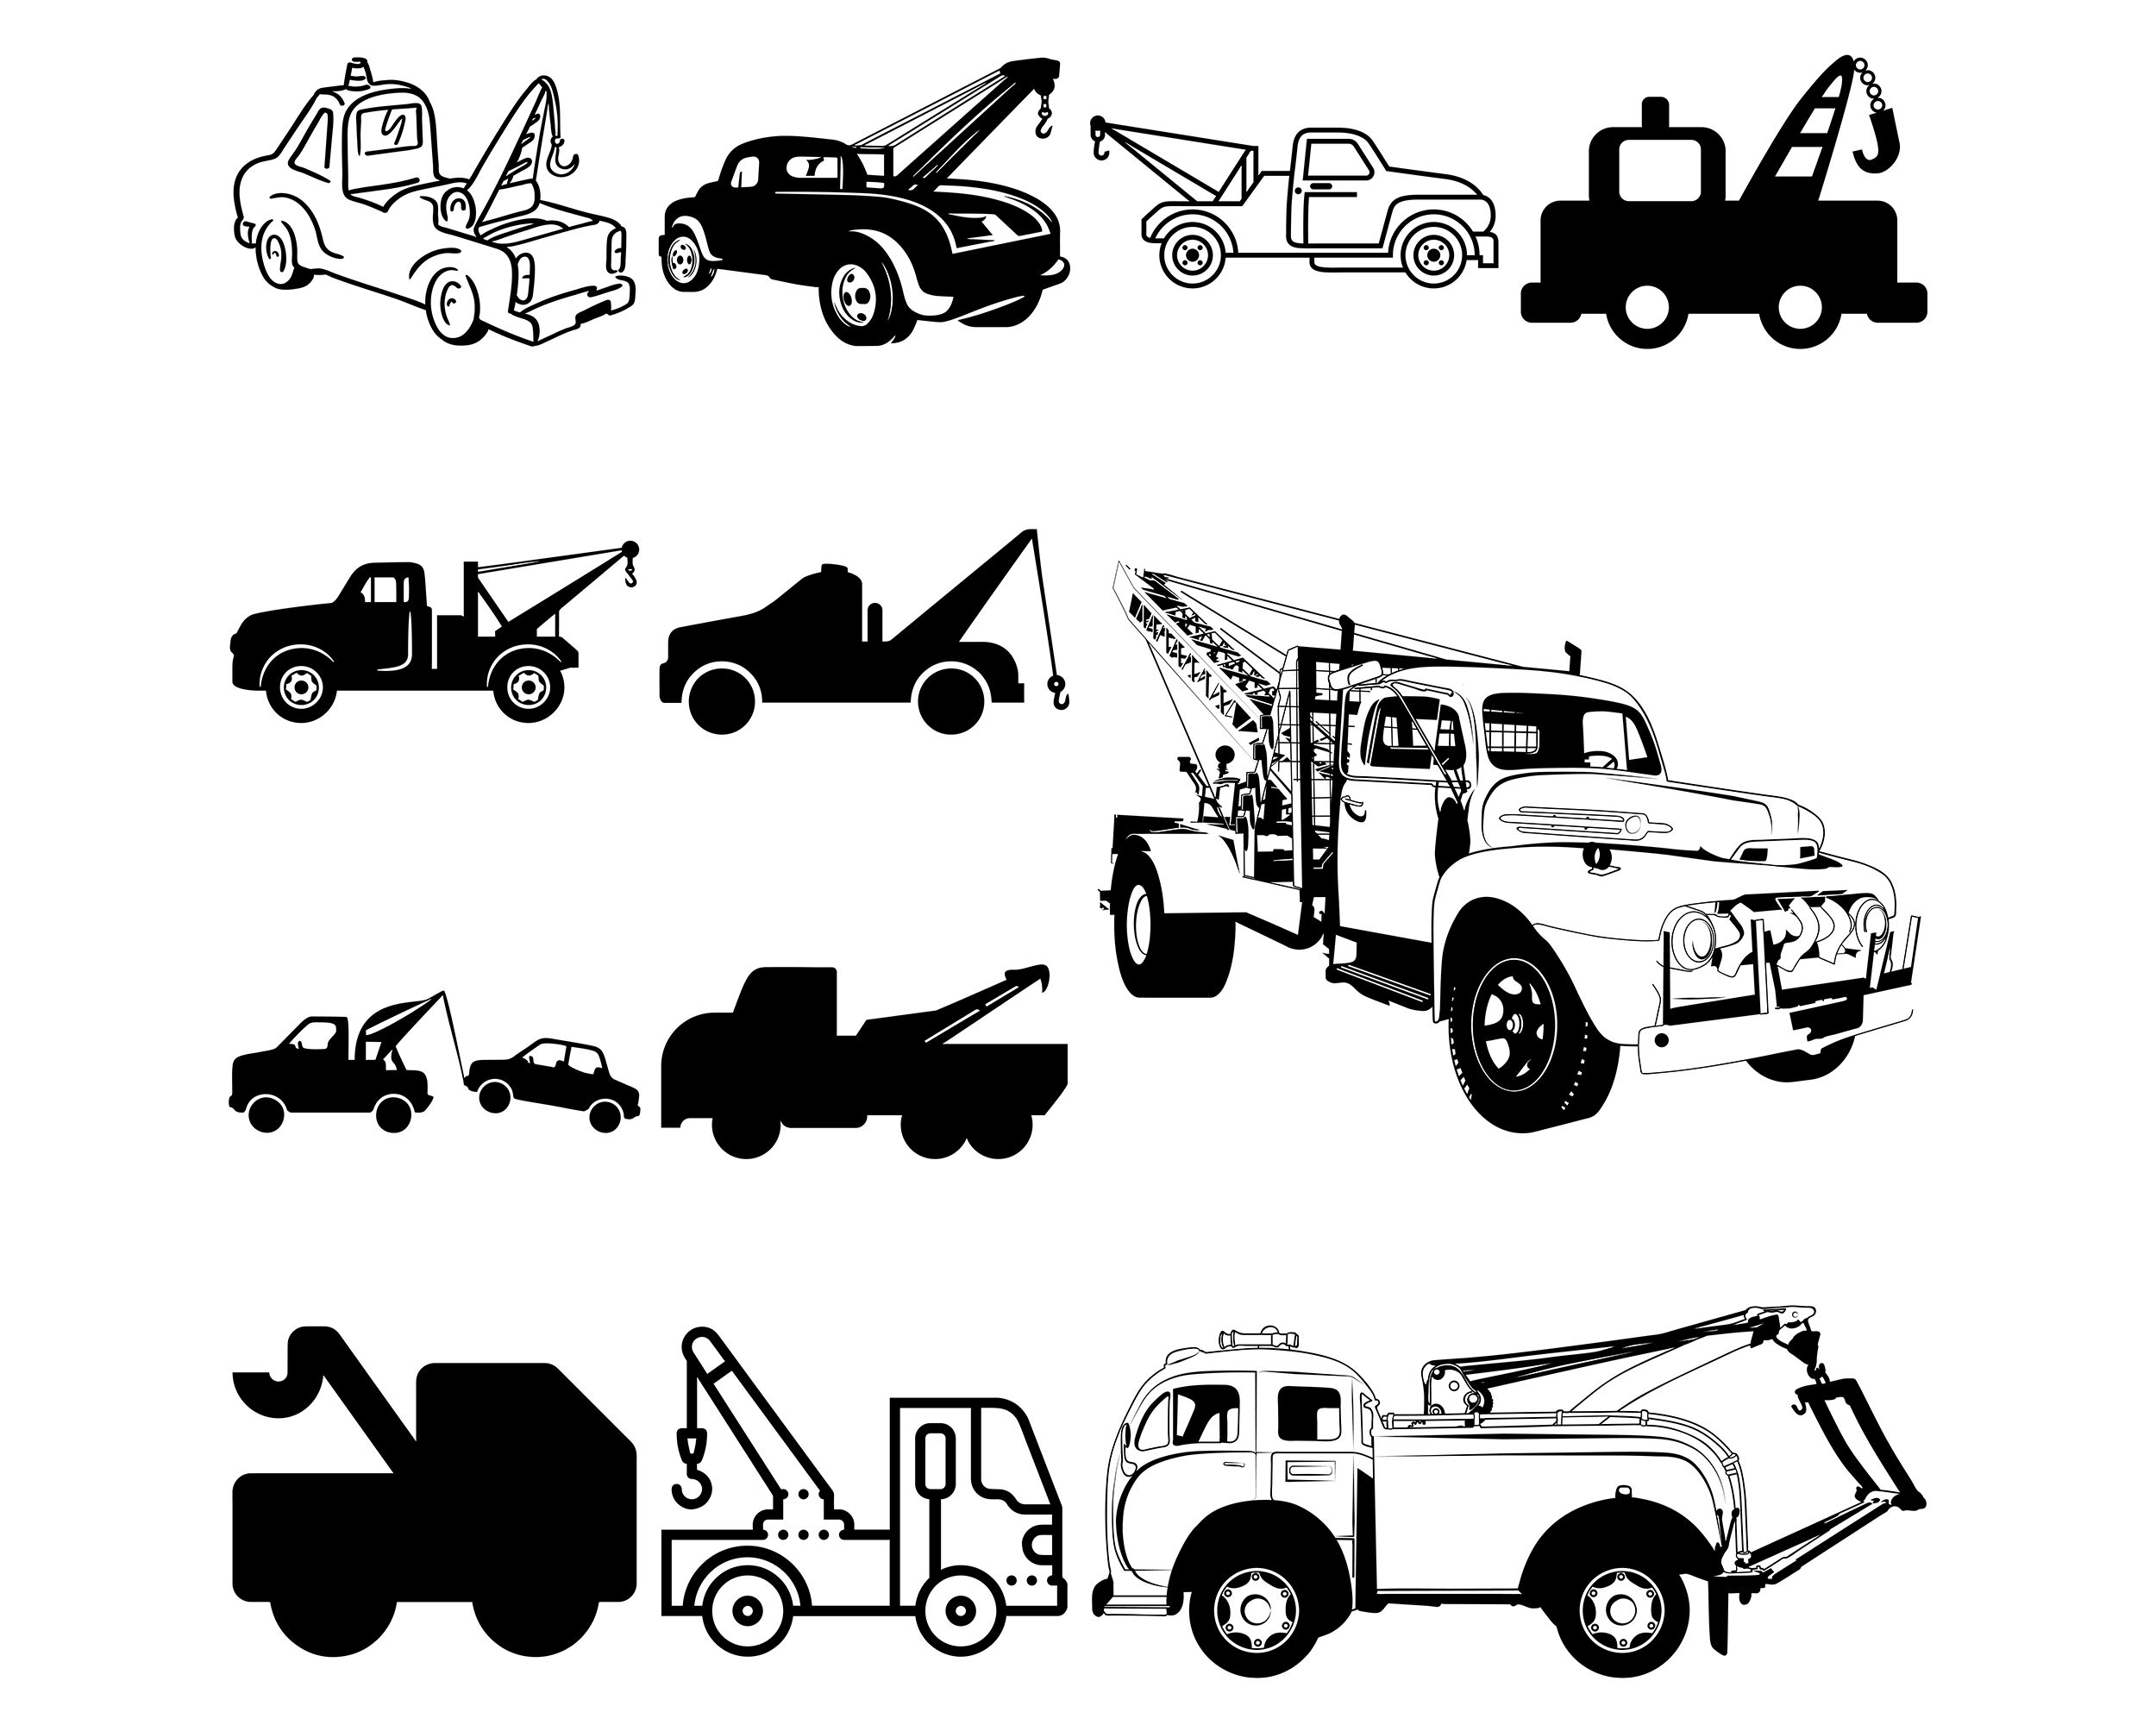 Tow svg Tow Truck Stencil Tow Truck Clipart Tow Truck Cutting Files Tow Truck Svg Tow Truck Instant Downloads 8 Tow Truck Driver svg